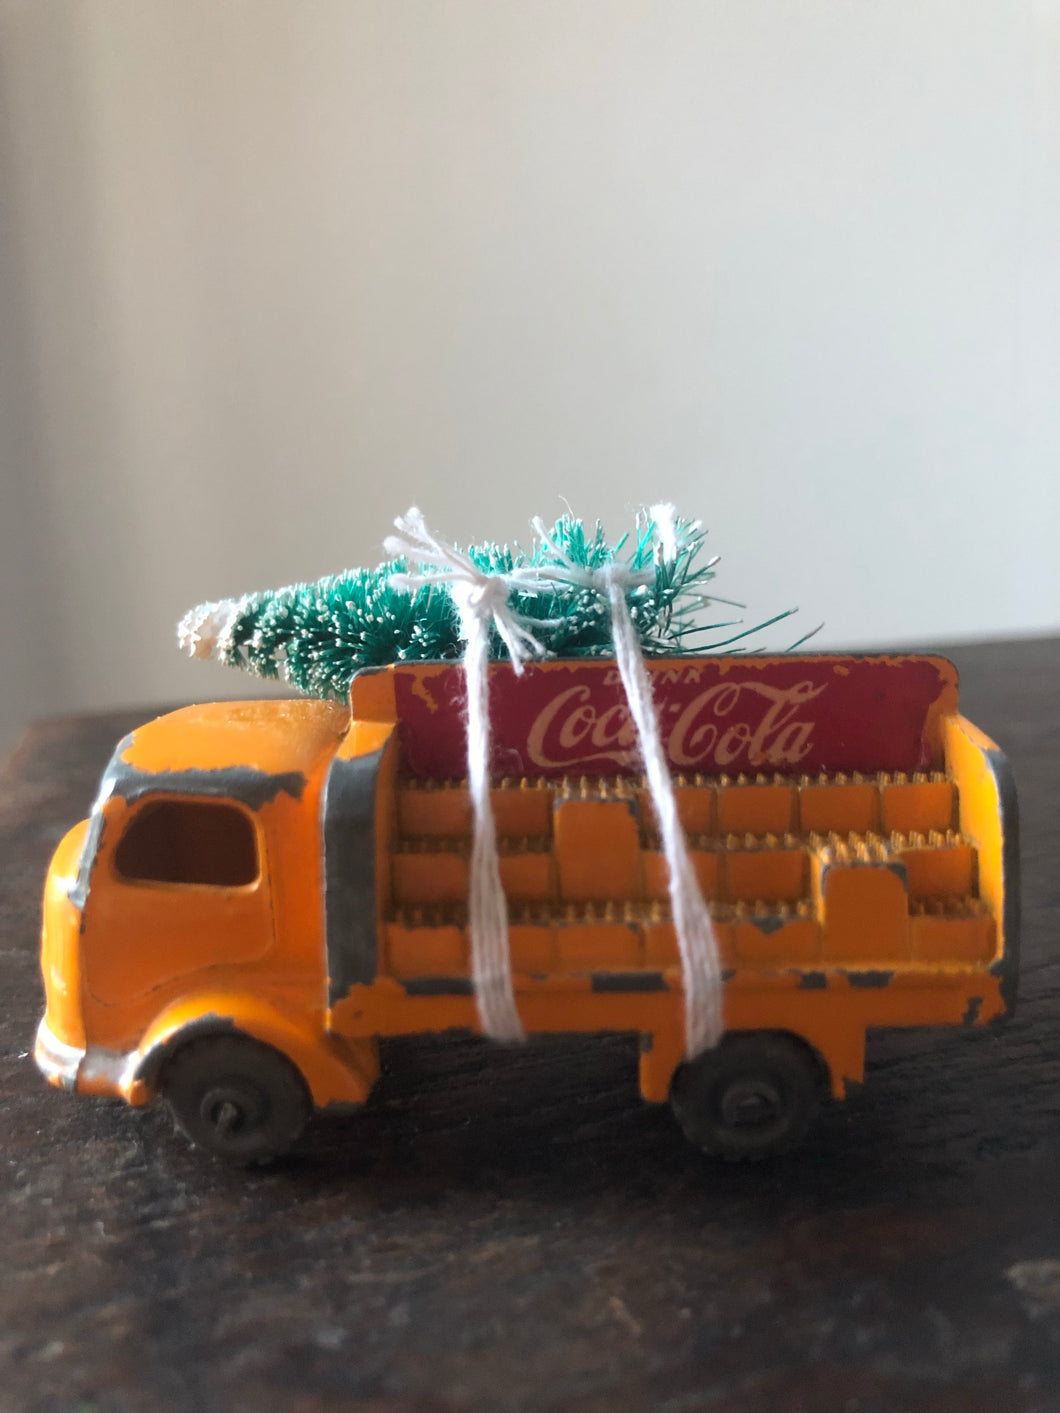 NEW - Vintage Driving Home For Christmas, Coca Cola Truck